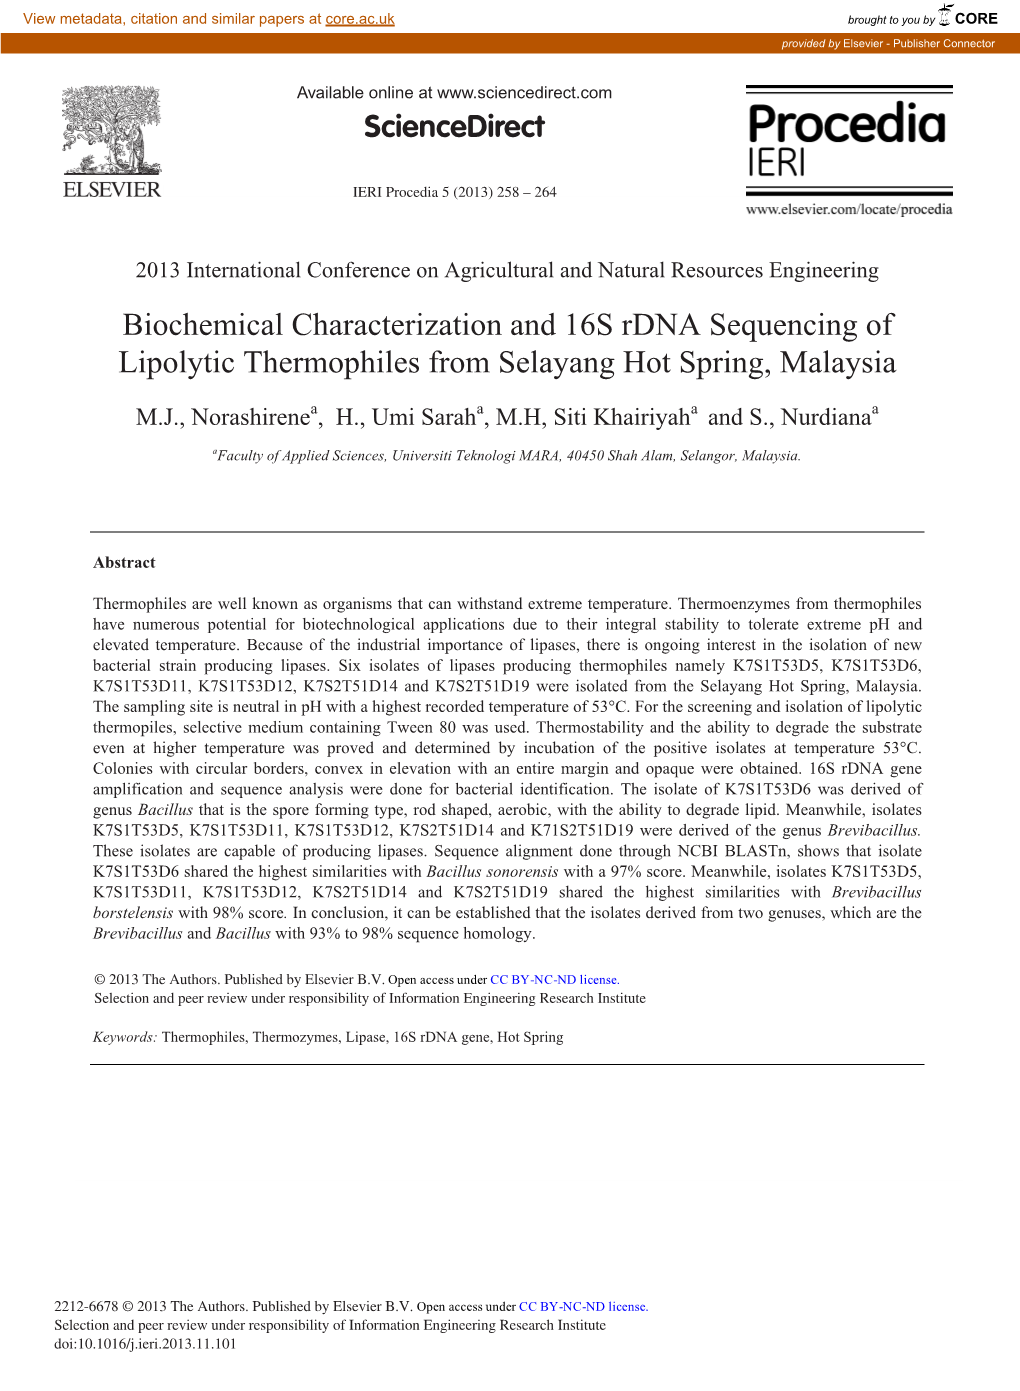 Biochemical Characterization and 16S Rdna Sequencing of Lipolytic Thermophiles from Selayang Hot Spring, Malaysia